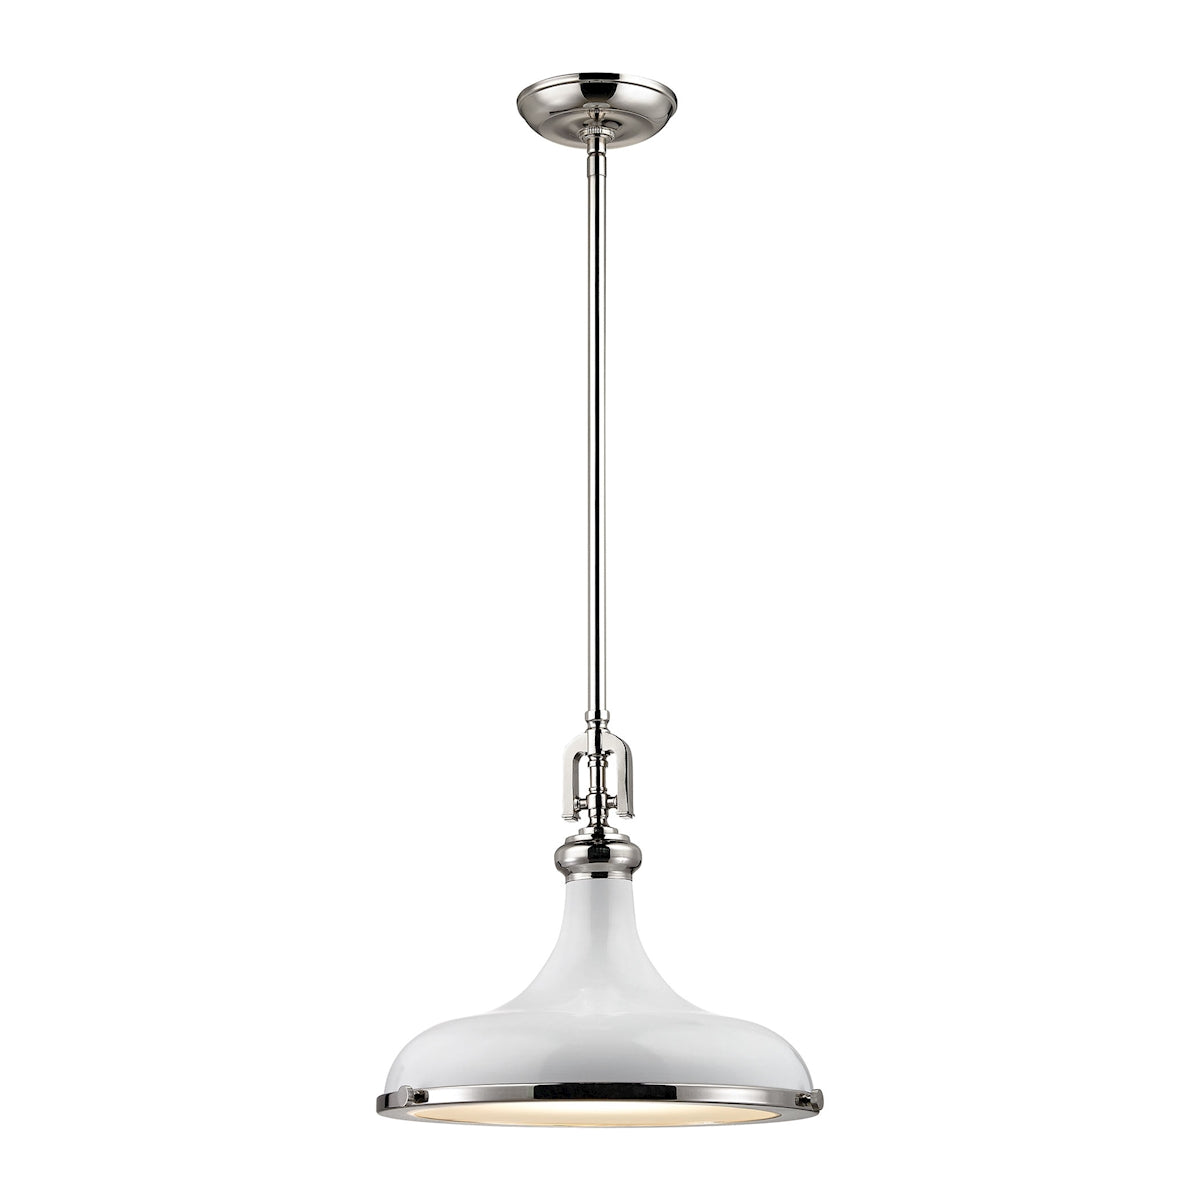 ELK Lighting 57041/1 Rutherford 1-Light Pendant in Polished Nickel with Gloss White Shade